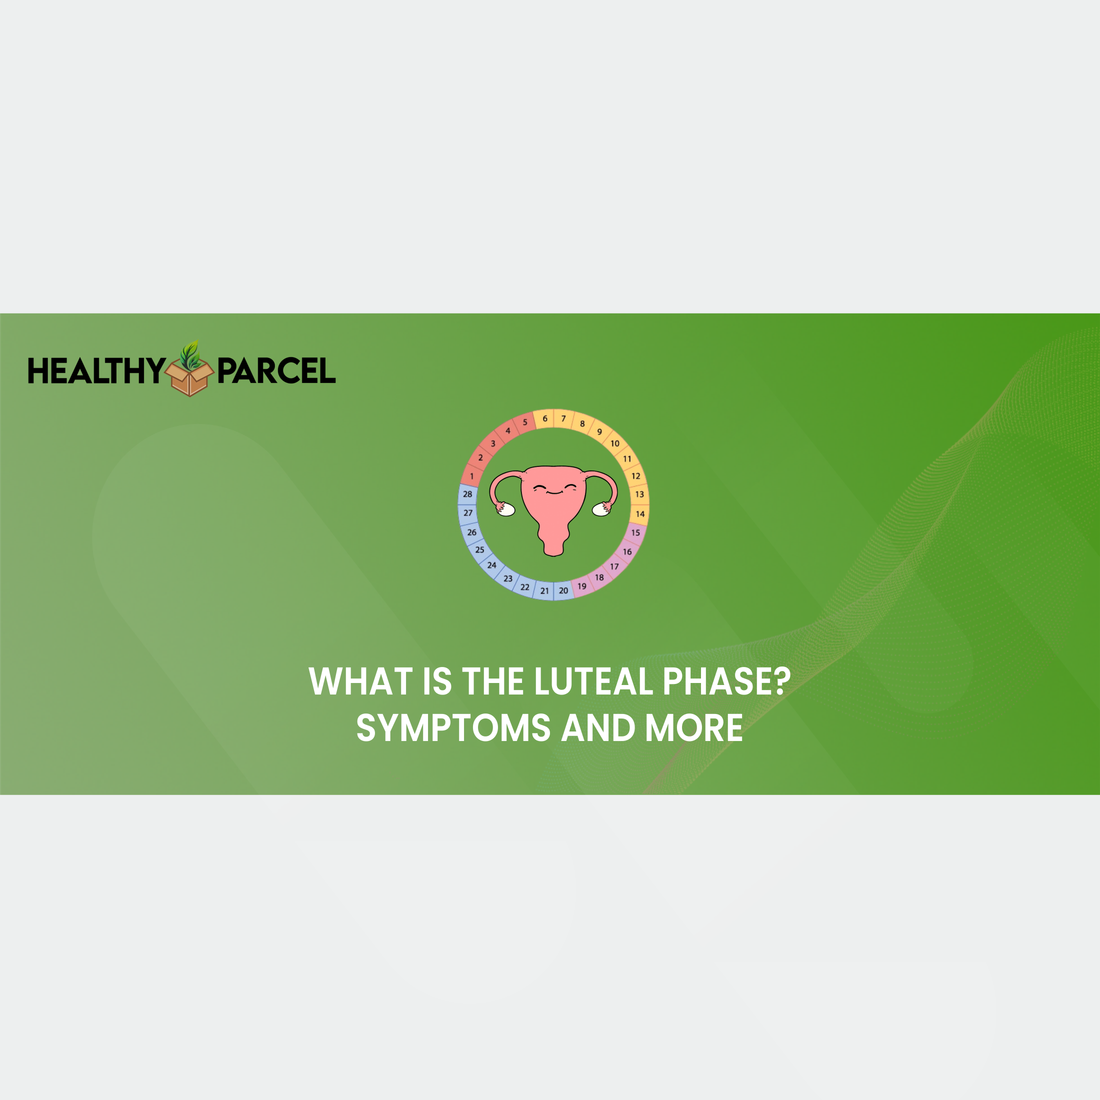 What Is the Luteal Phase